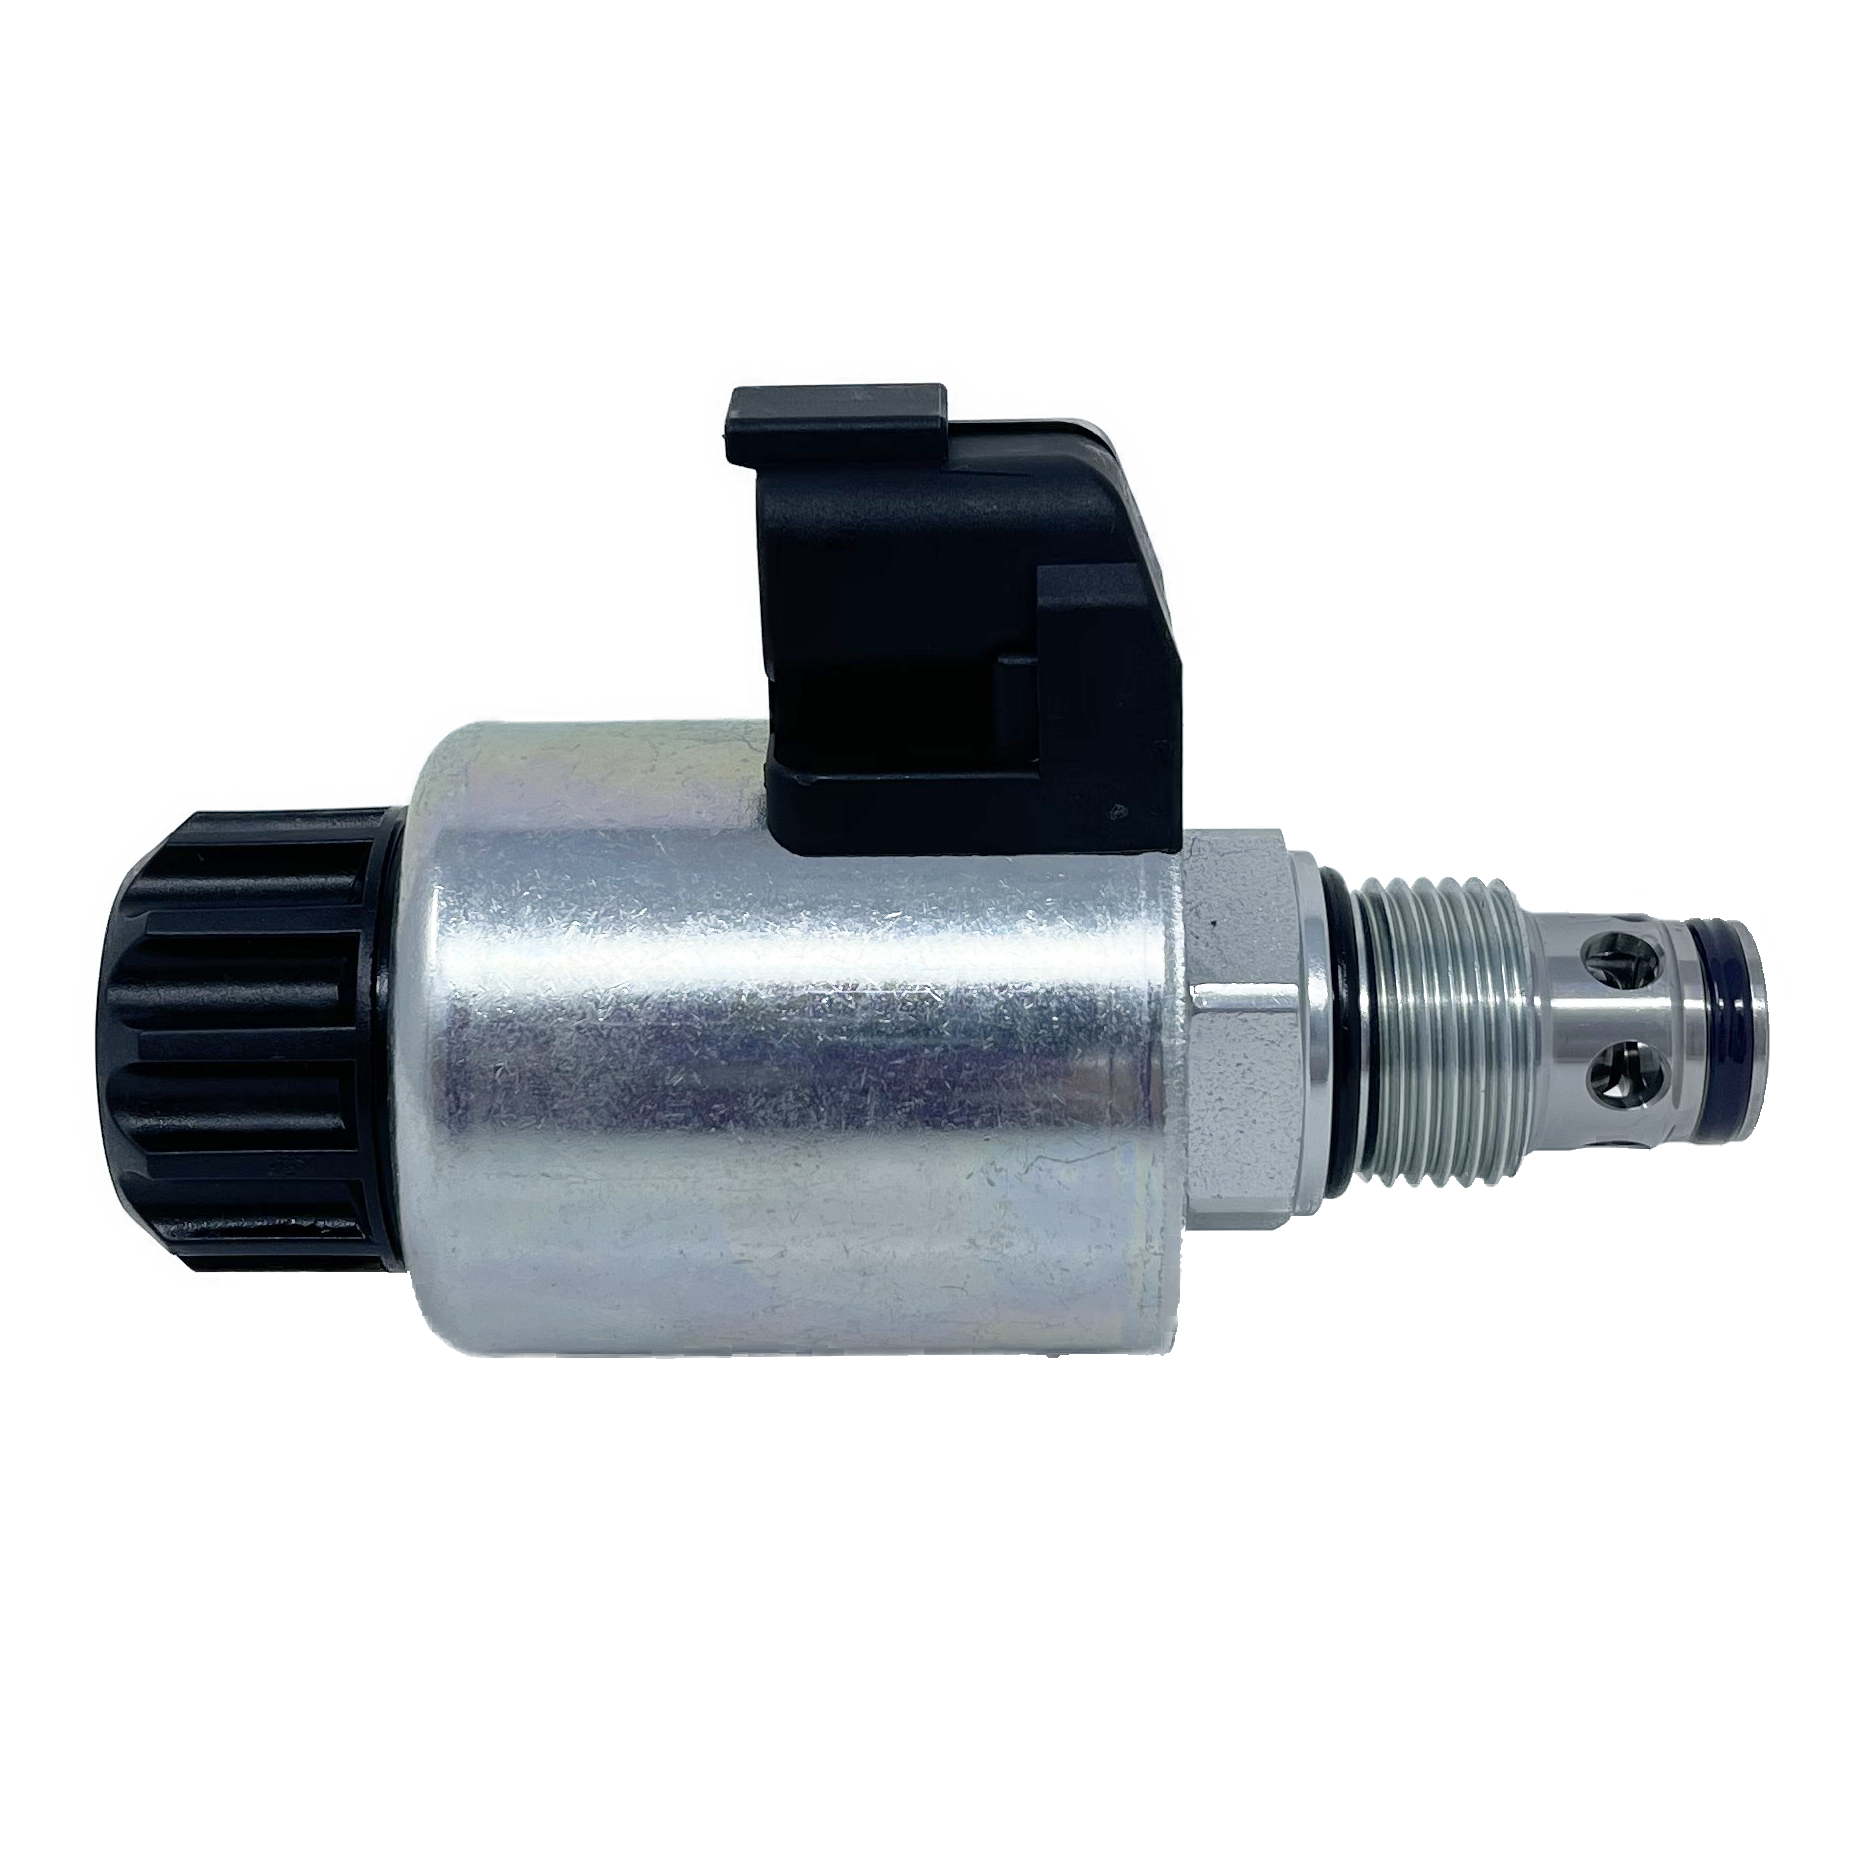 SD3E-B2/H2L2A24DT : Argo DCV, 16GPM, 5100psi, 2P2W, C-10-2, 24 VDC Deutsch, Check 1 to 2 Neutral